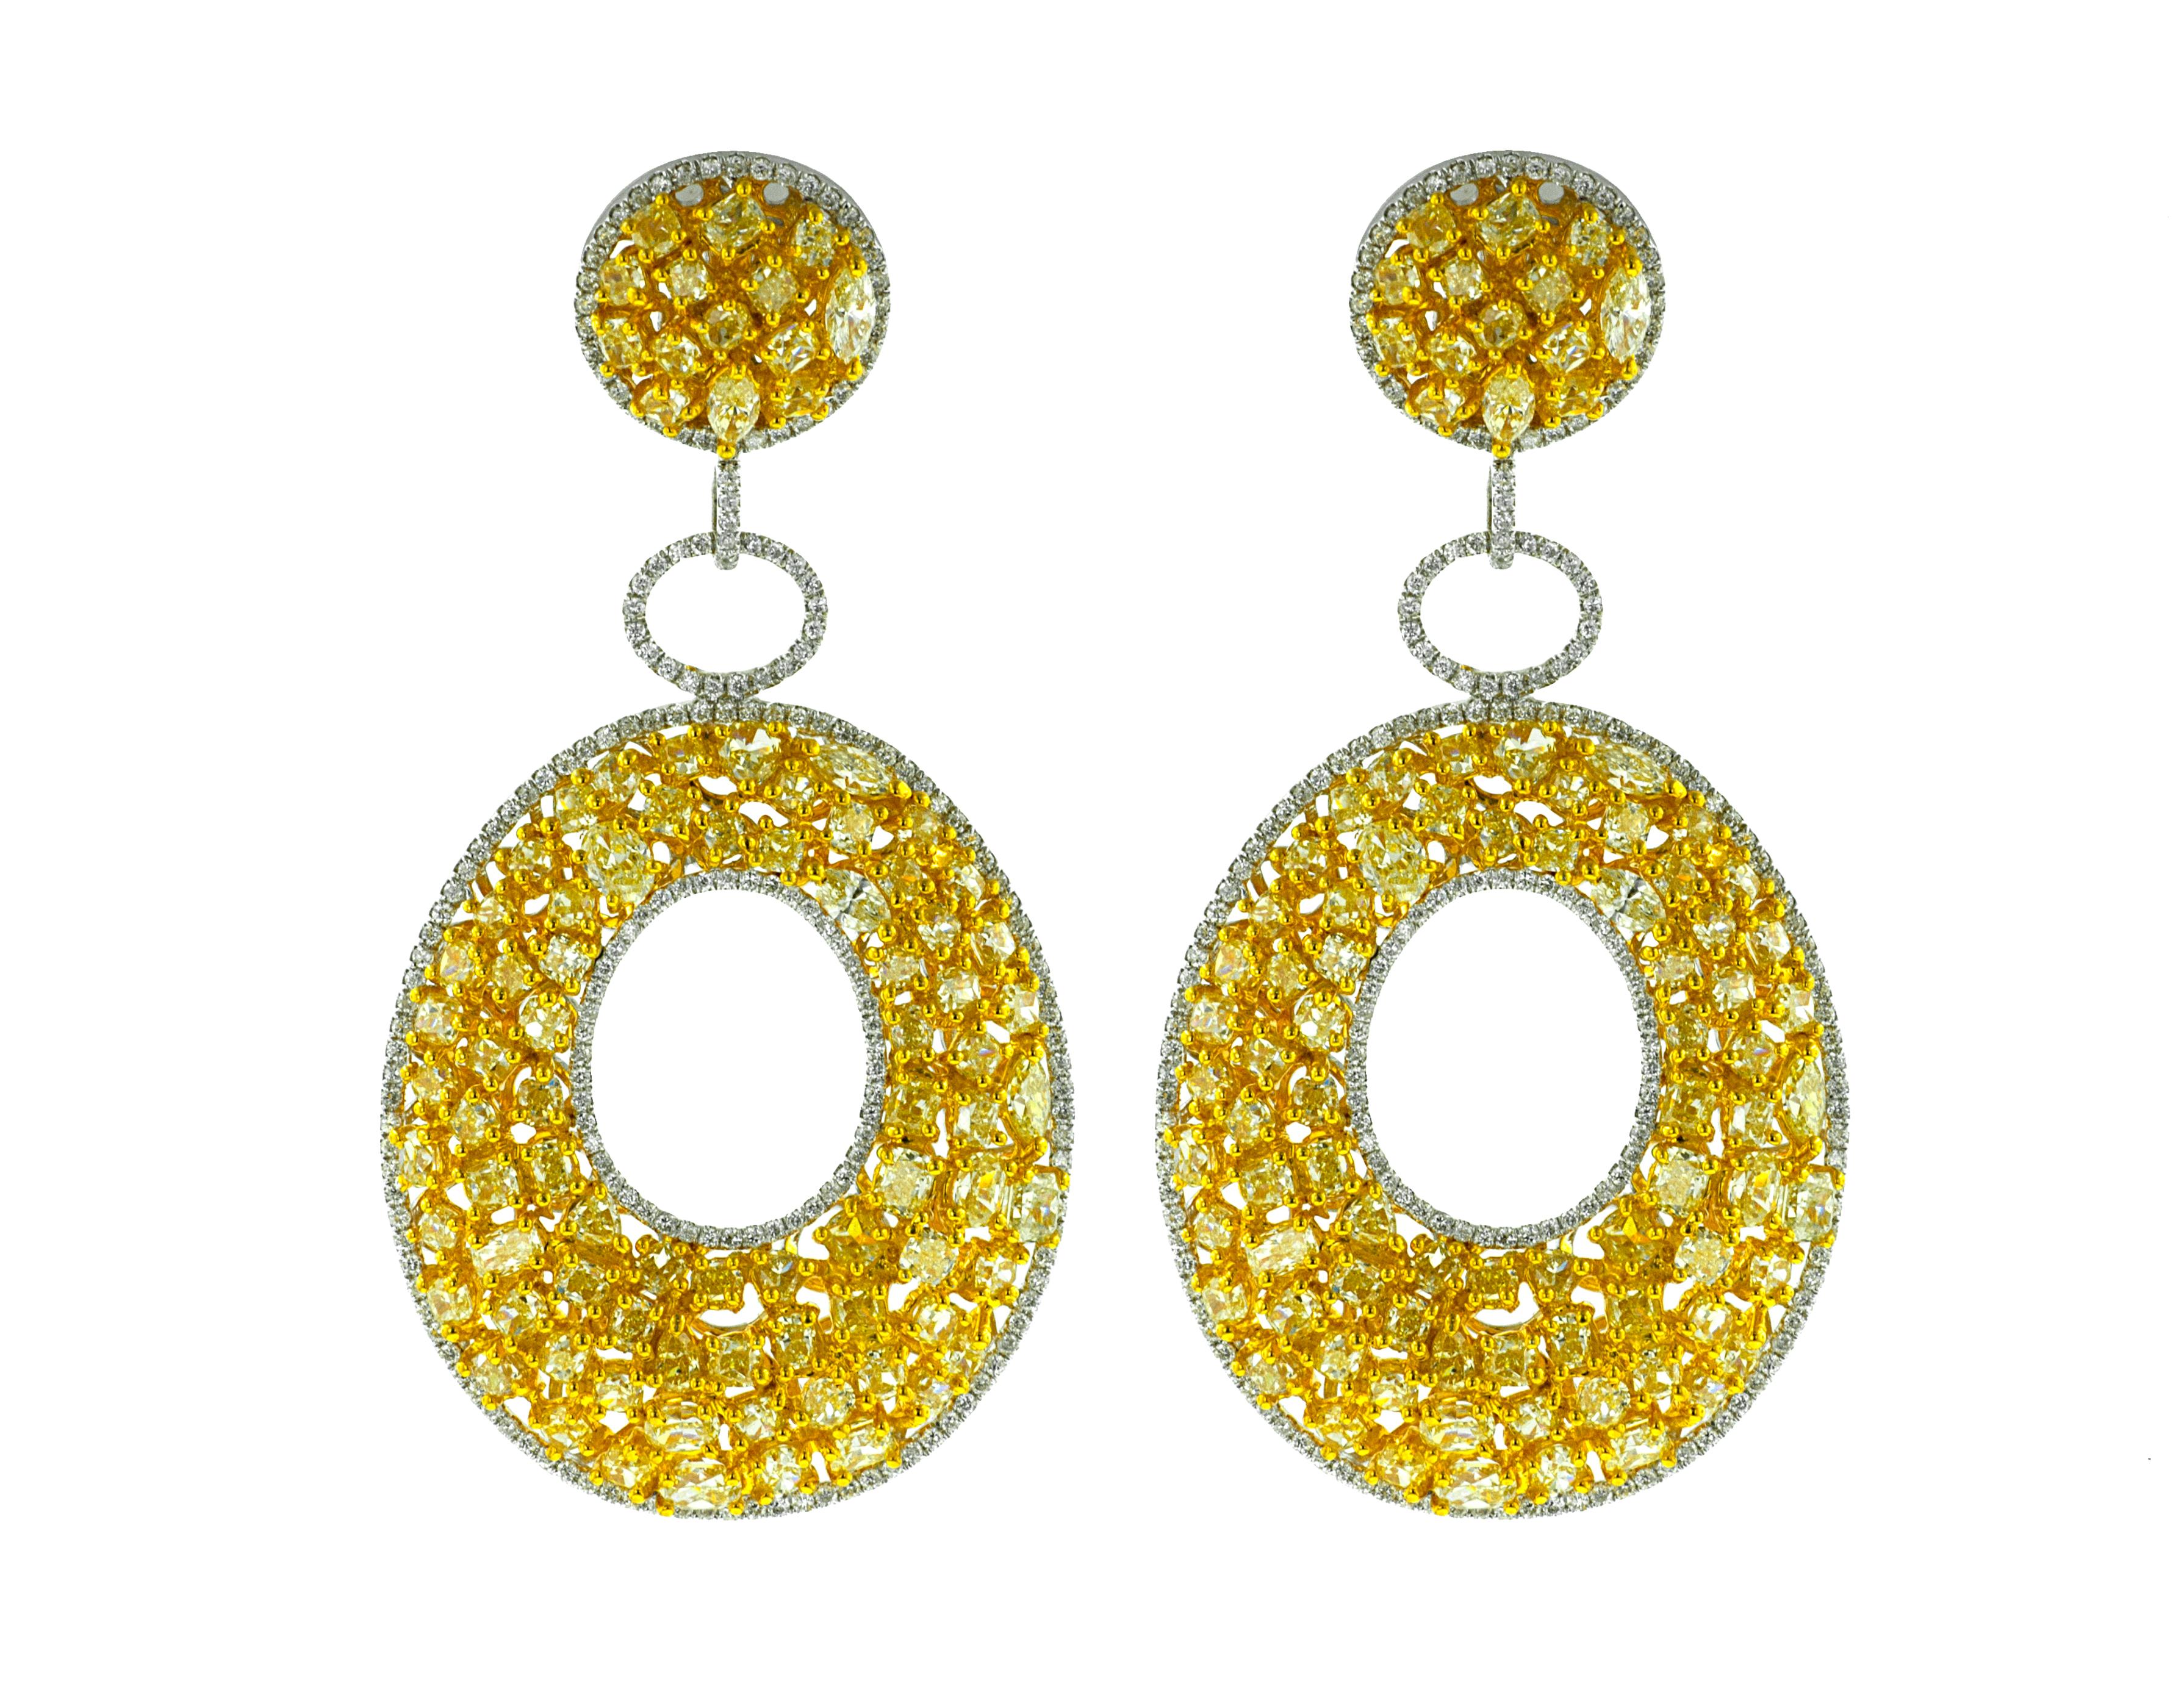 Round Cut Diana M. 18 kt White and Yellow Gold Fancy Diamond earrings containing 20.12 cts For Sale